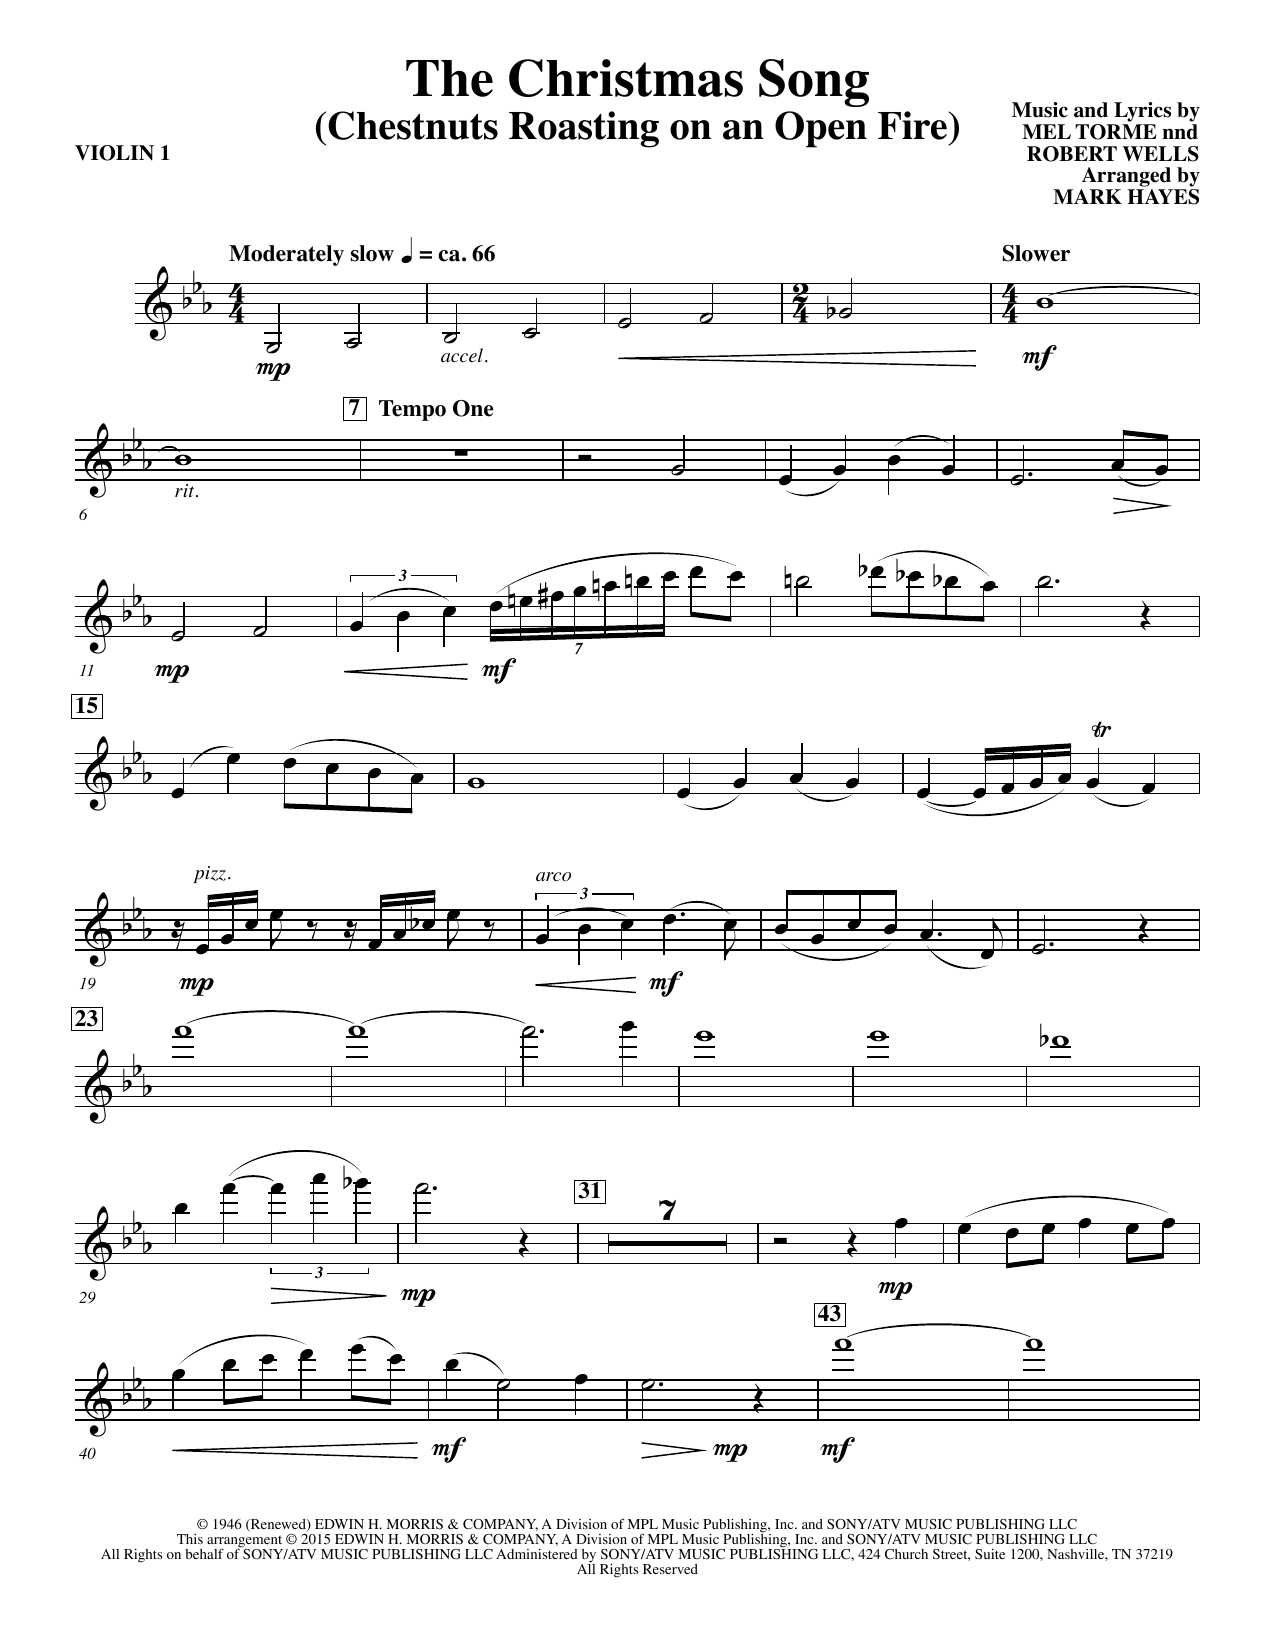 Mel Torme The Christmas Song (Chestnuts Roasting On An Open Fire) - Violin 1 sheet music notes and chords. Download Printable PDF.